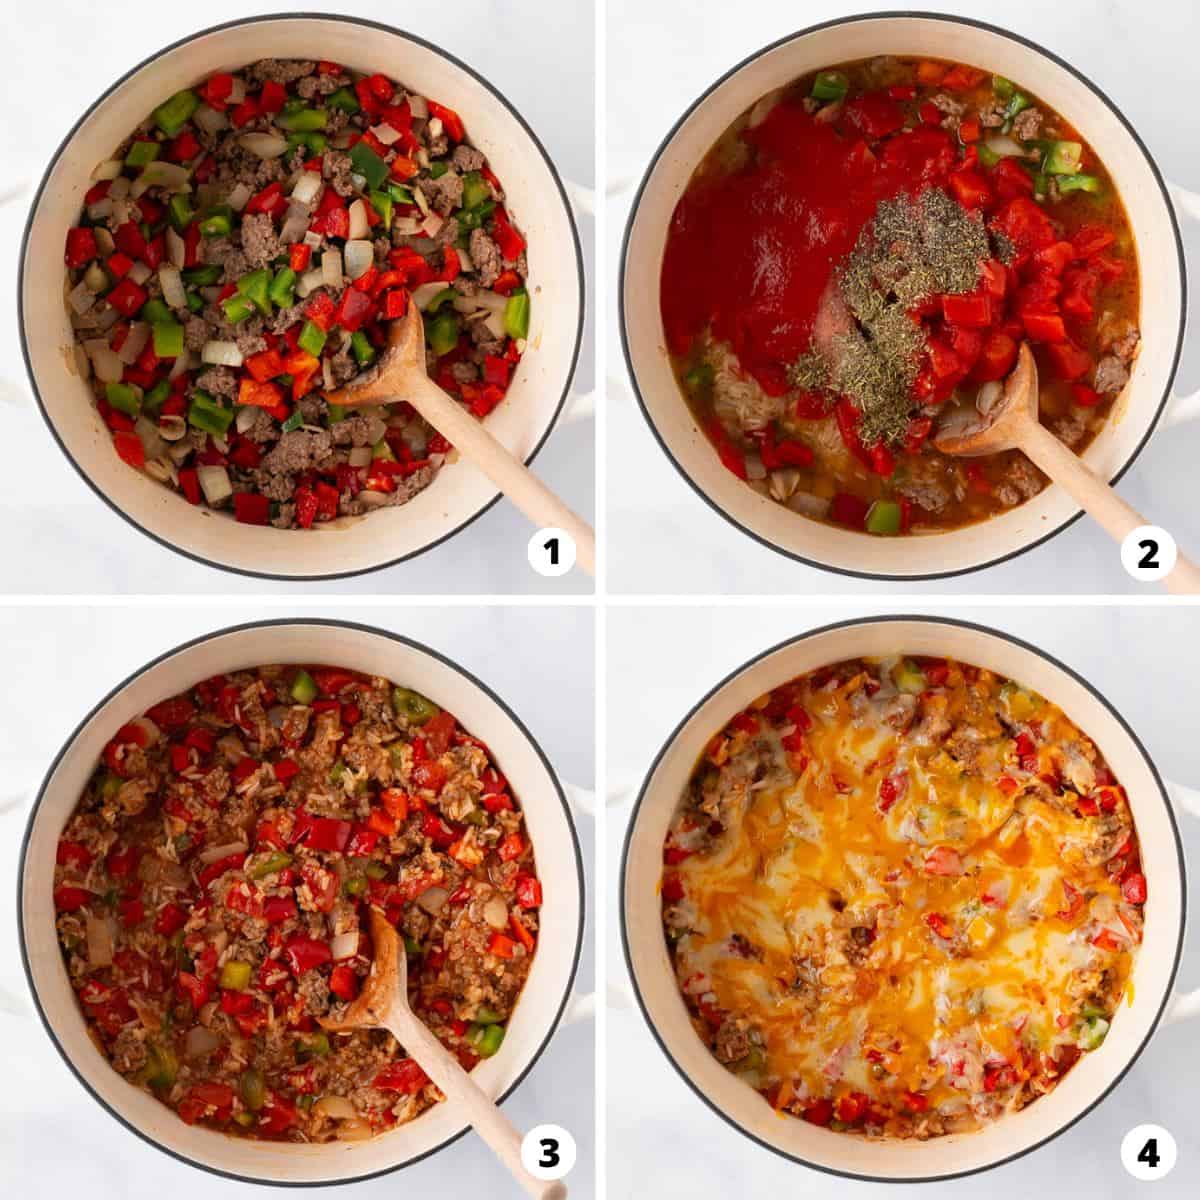 Showing how to make stuffed pepper casserole in a 4 step collage.